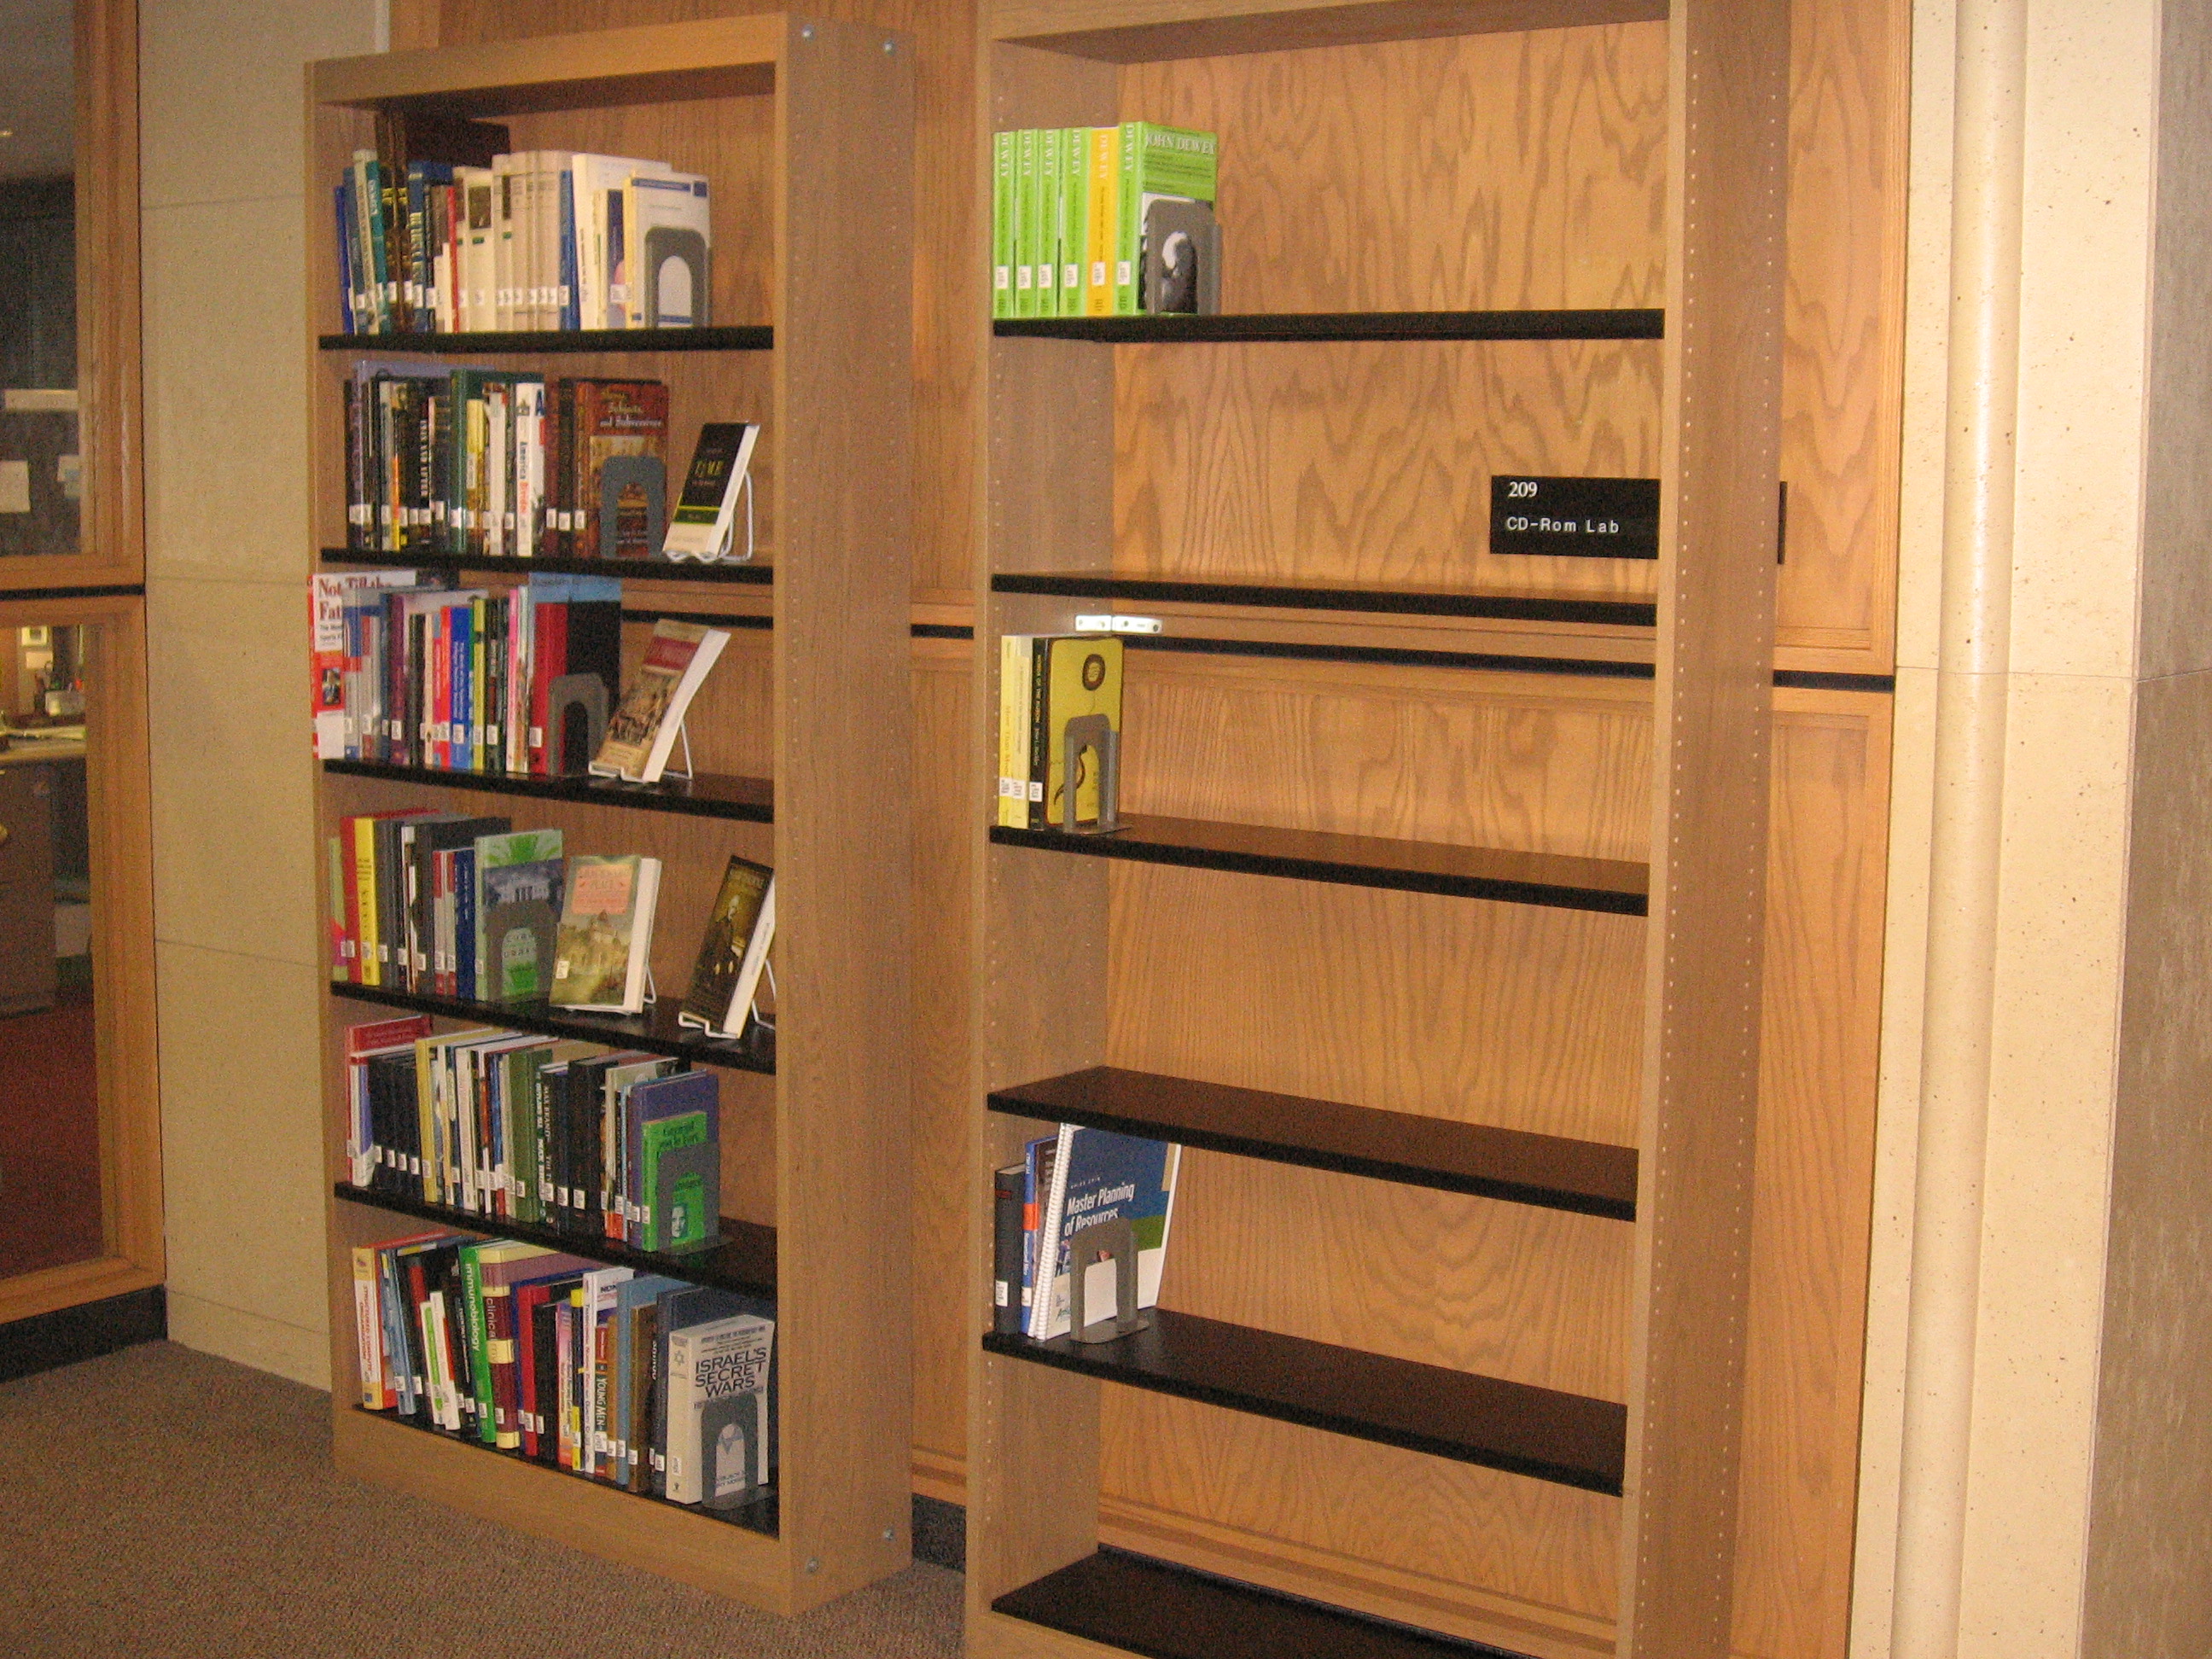 New Books Bookshelves Have A Home, Types Of Book Shelves